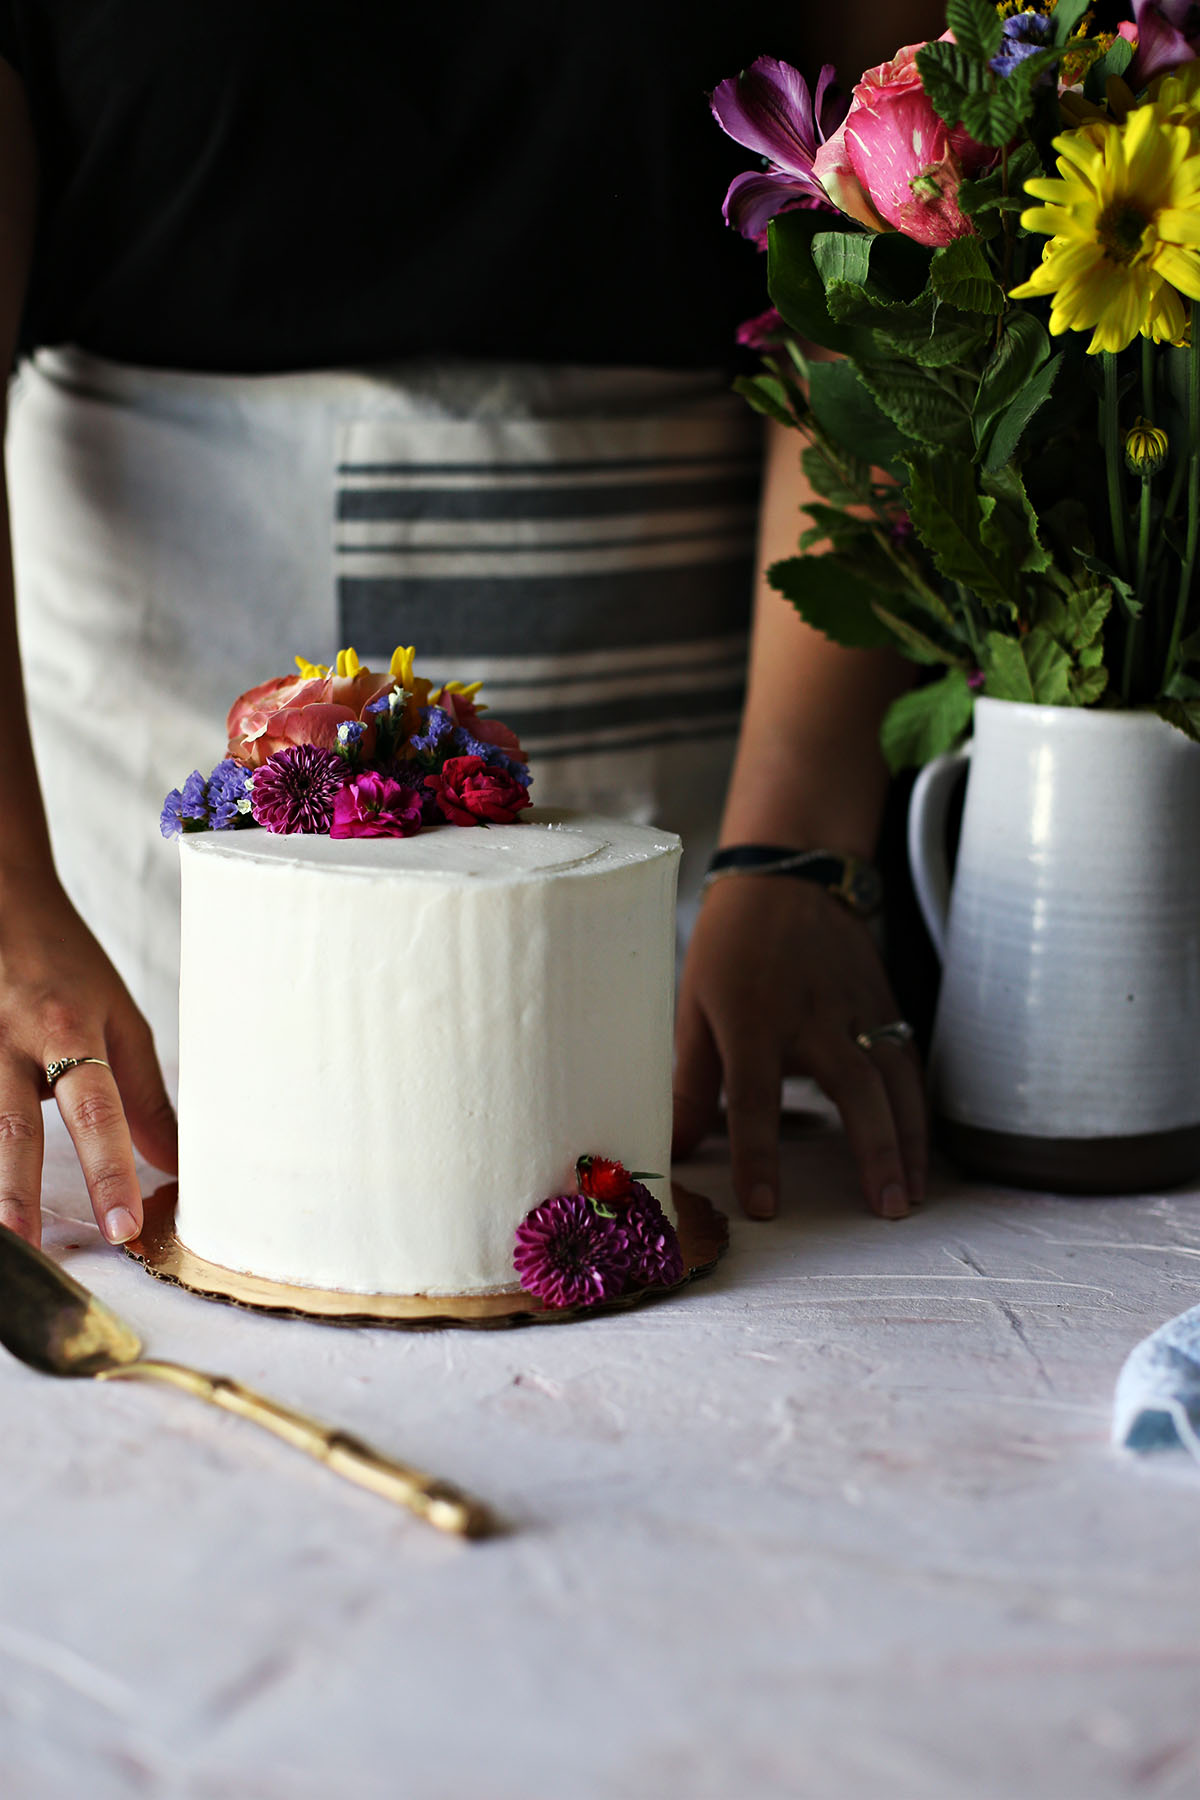 How to Use Fresh Flowers in Cake Decorating